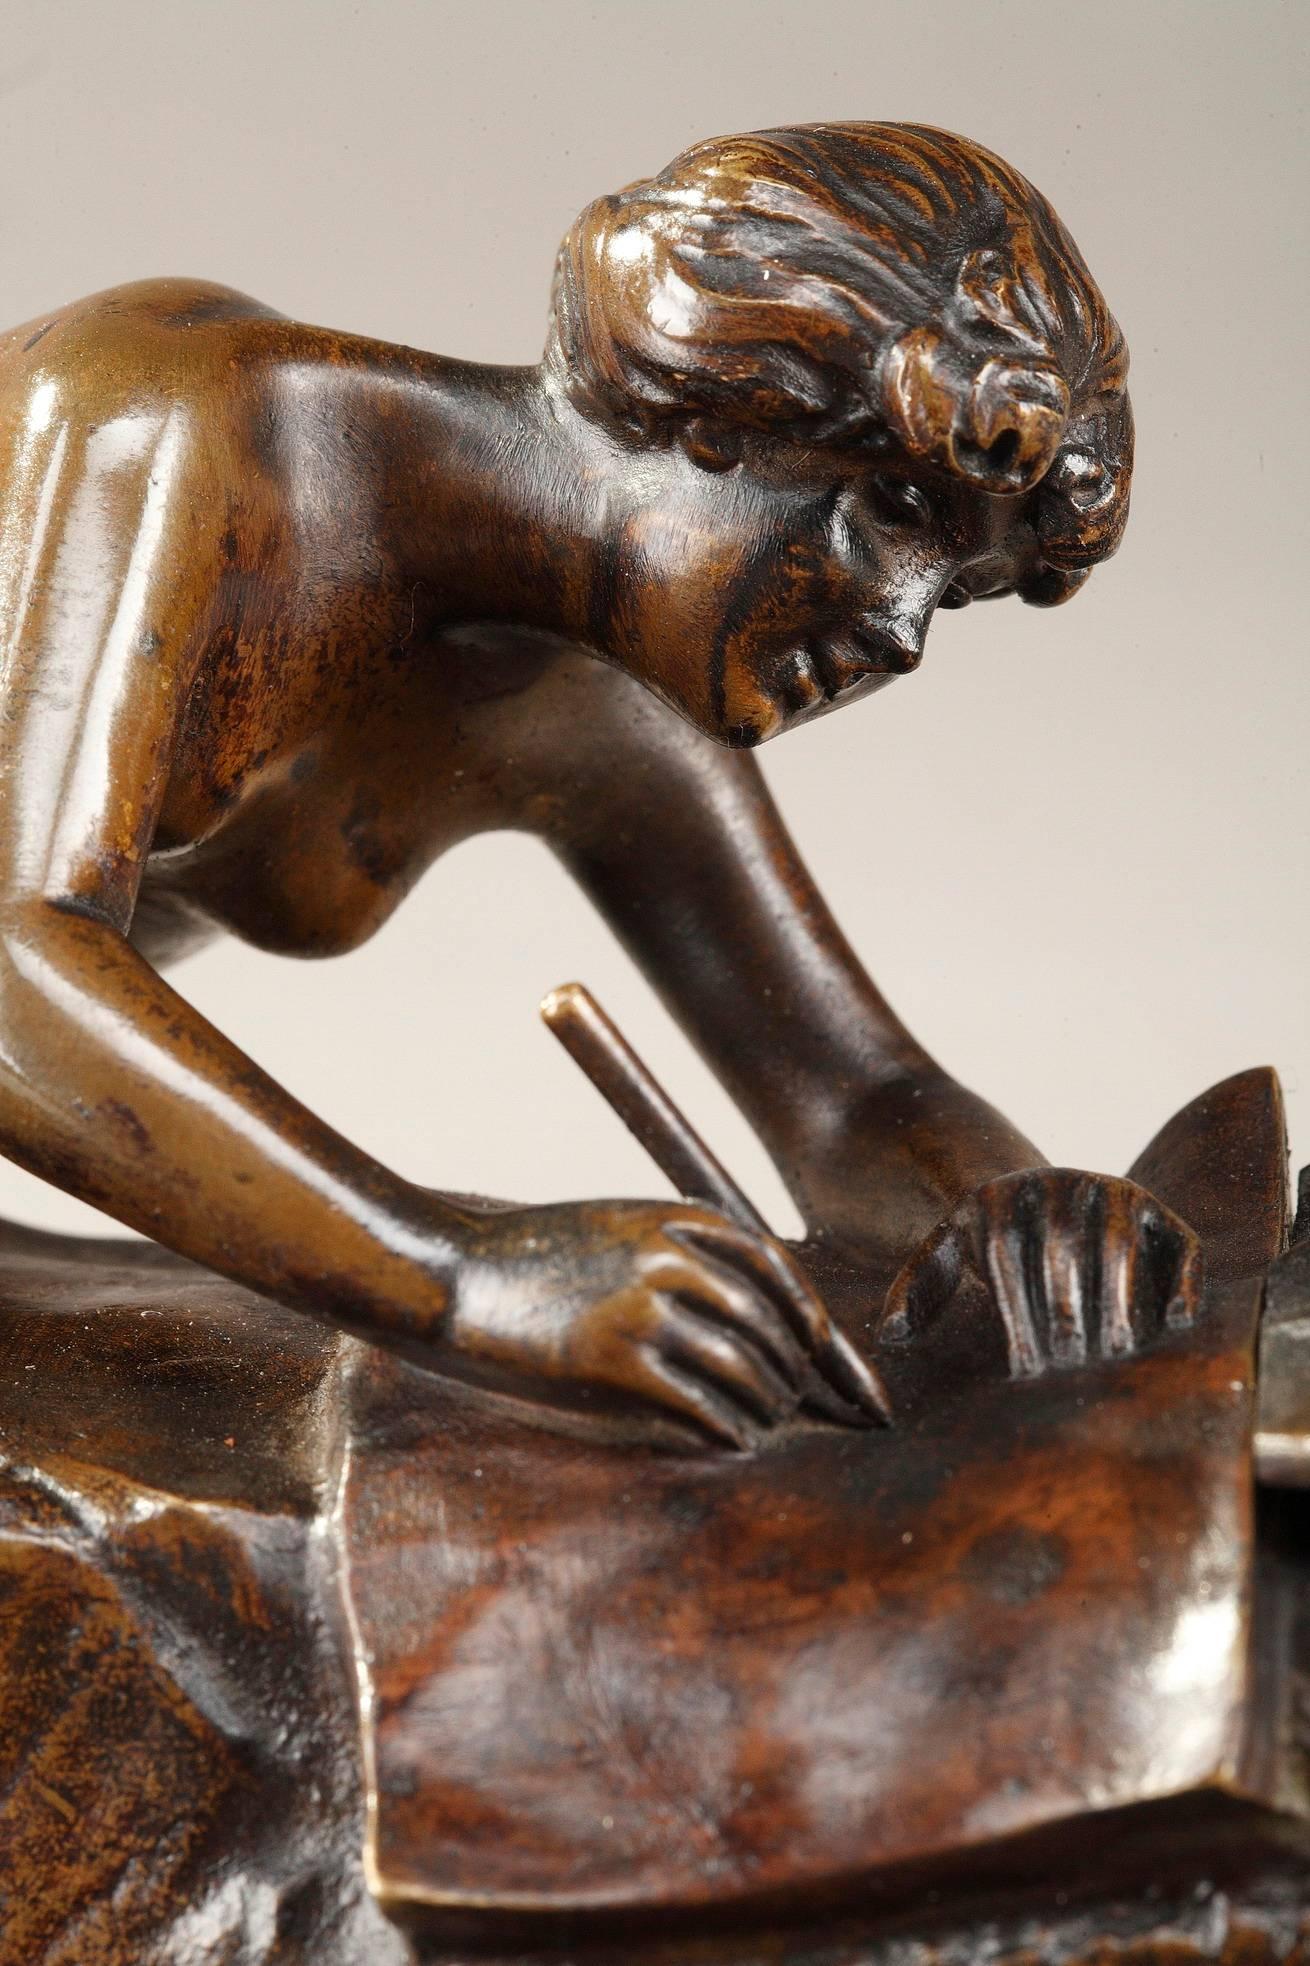 Small patinated bronze sculpture forming an inkwell and representing a young nymph writing, lengthened on a bed of reeds and plant motifs. By Karl (Charles) Korschann (Czech, 1872-1943). The buckets for ink are hidden under two large leaves. The